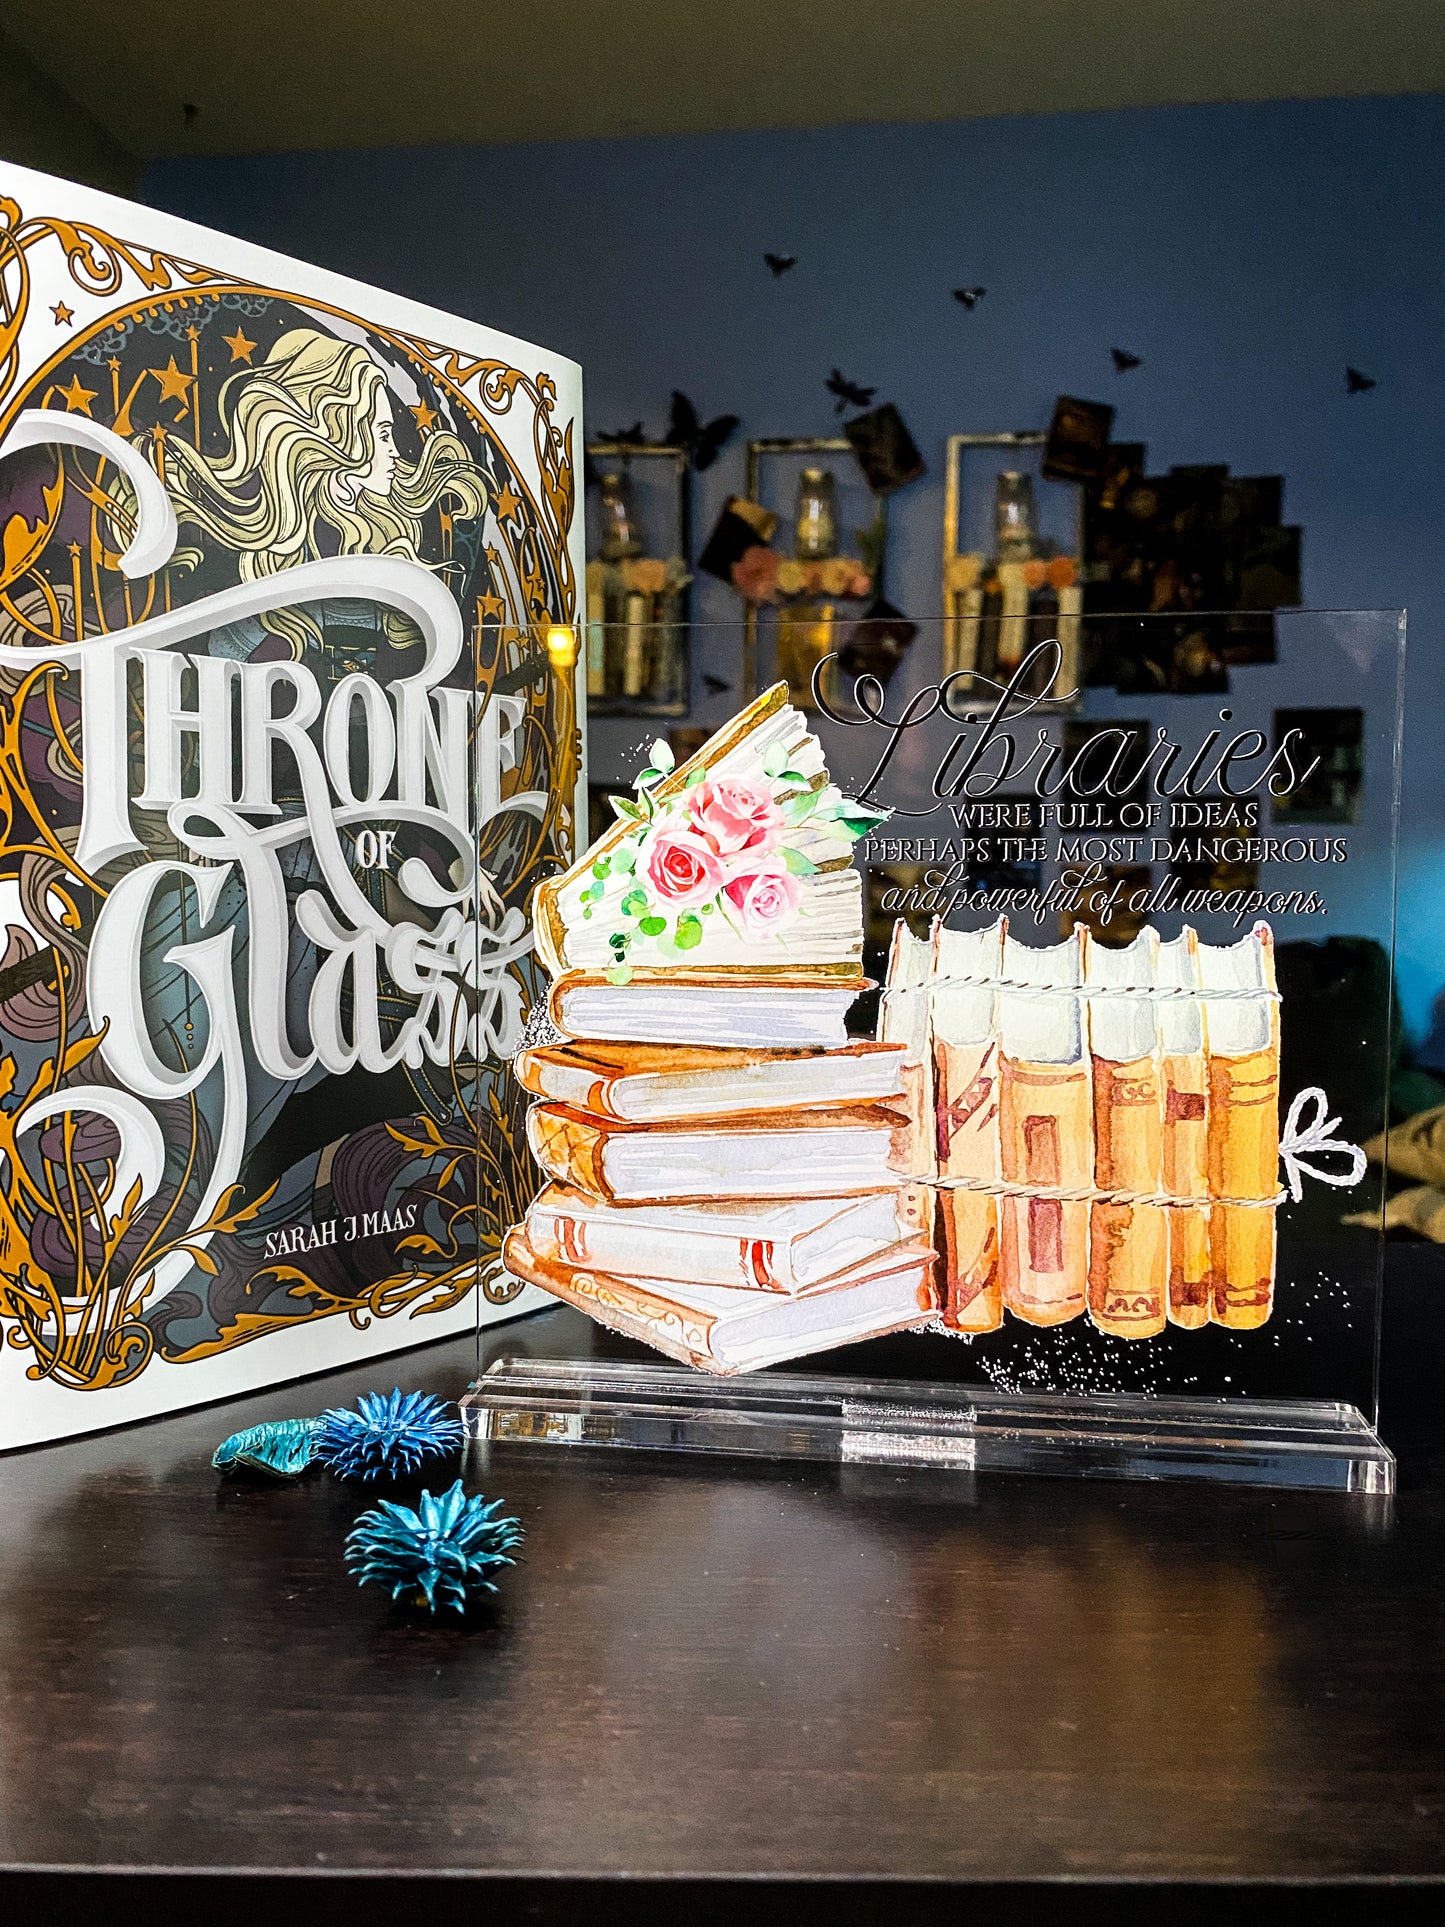 "Libraries were full of ideas - perhaps the most dangerous and powerful of all weapons" - Throne of Glass Series - Freestanding Bookshelf / Desktop Acrylic Accessory - Officially licensed by Sarah J. Maas - D58